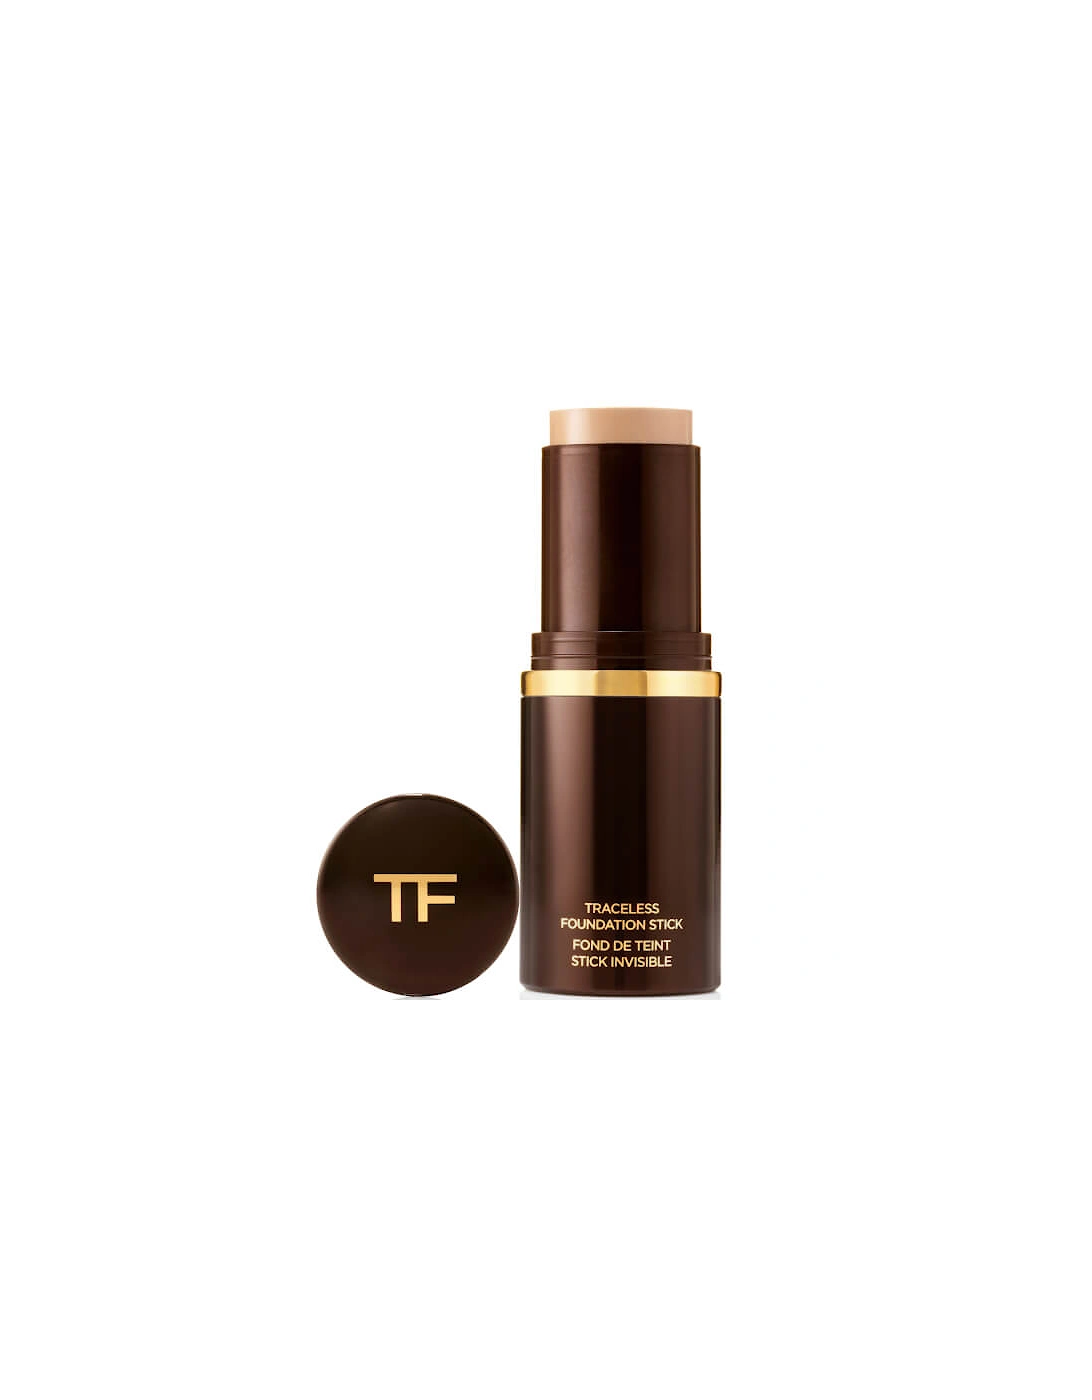 Traceless Foundation Stick - 0.0 Pearl, 2 of 1